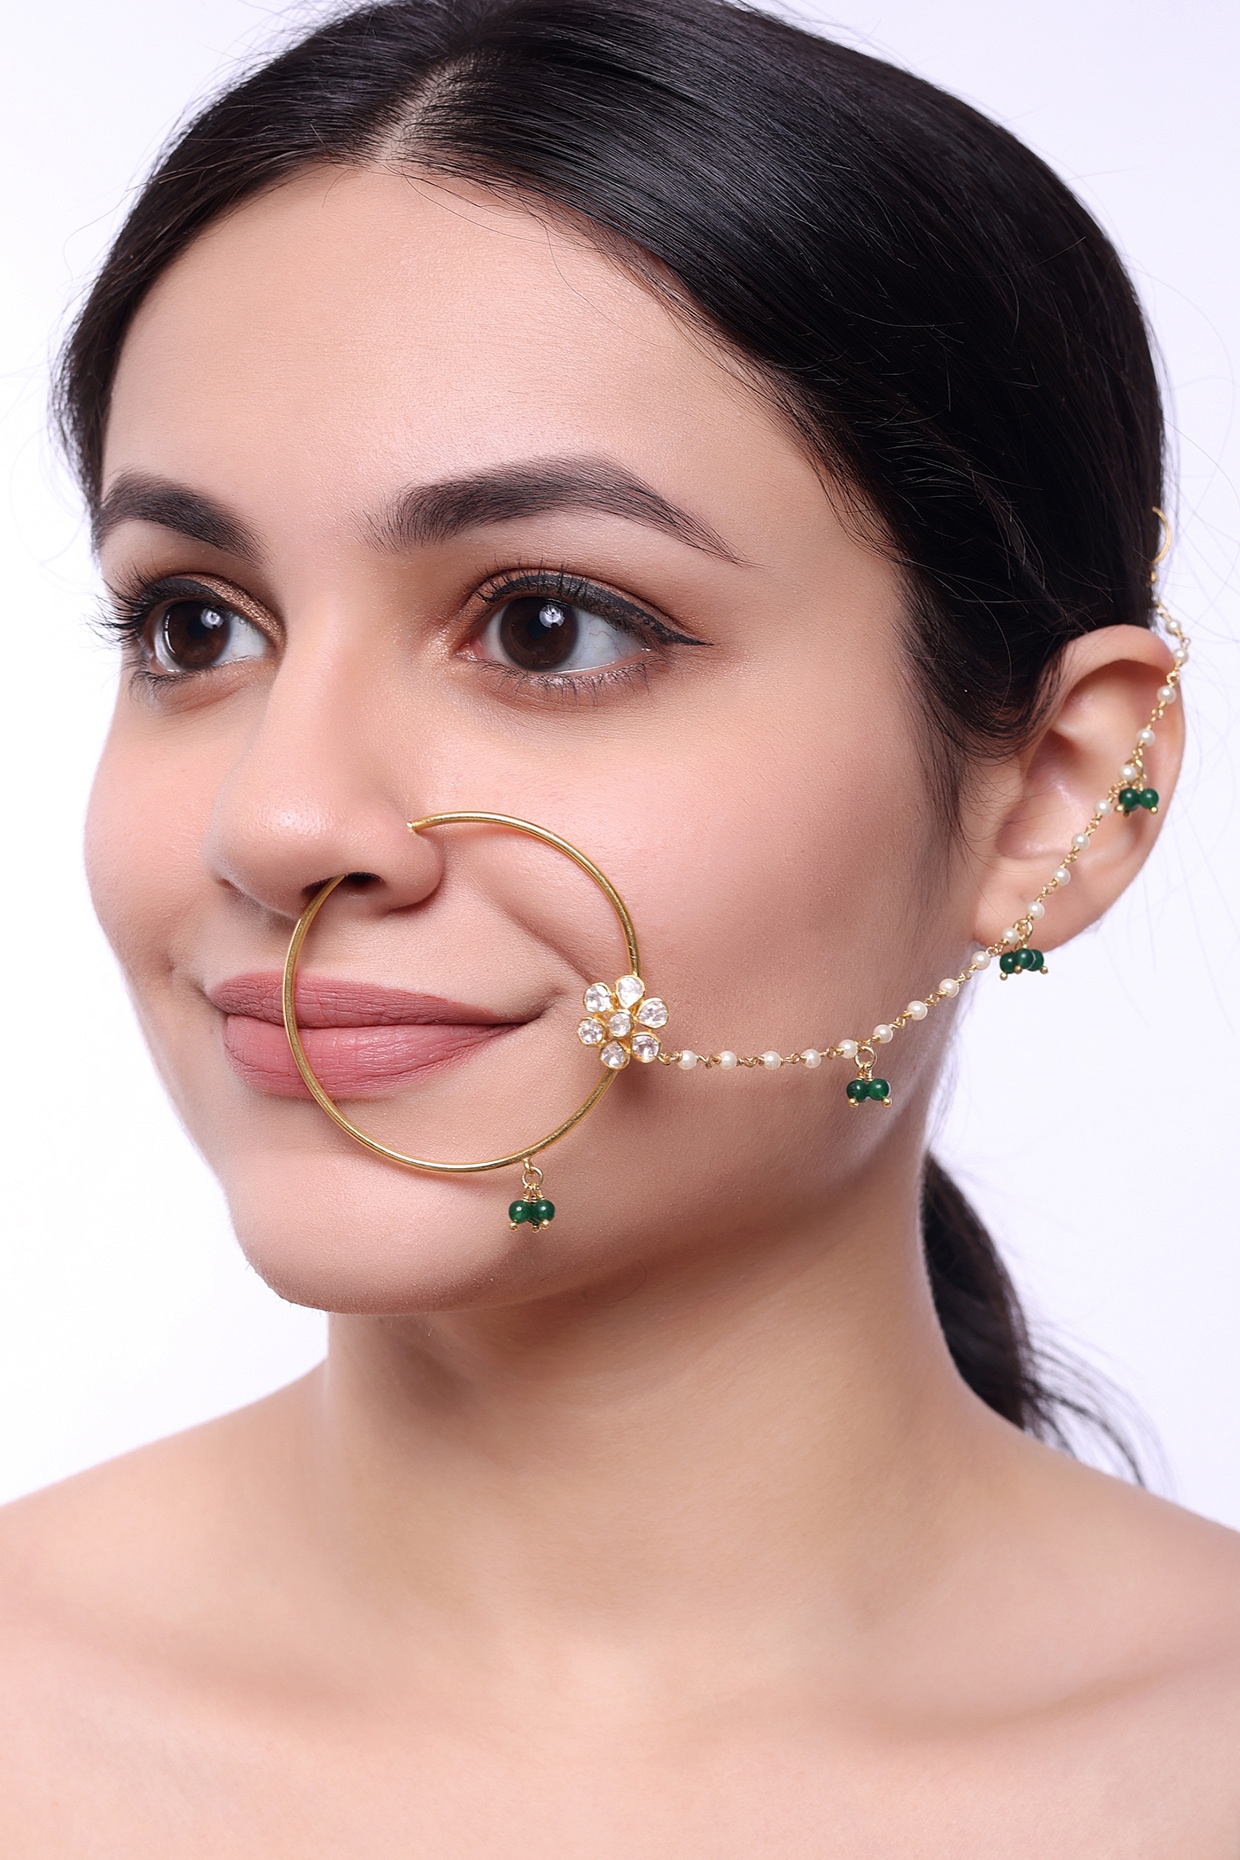 Buy Nose Chain, Nose Ring With Chains,titanium 20 Gauge Nose Ring With Chain  Online in India - Etsy